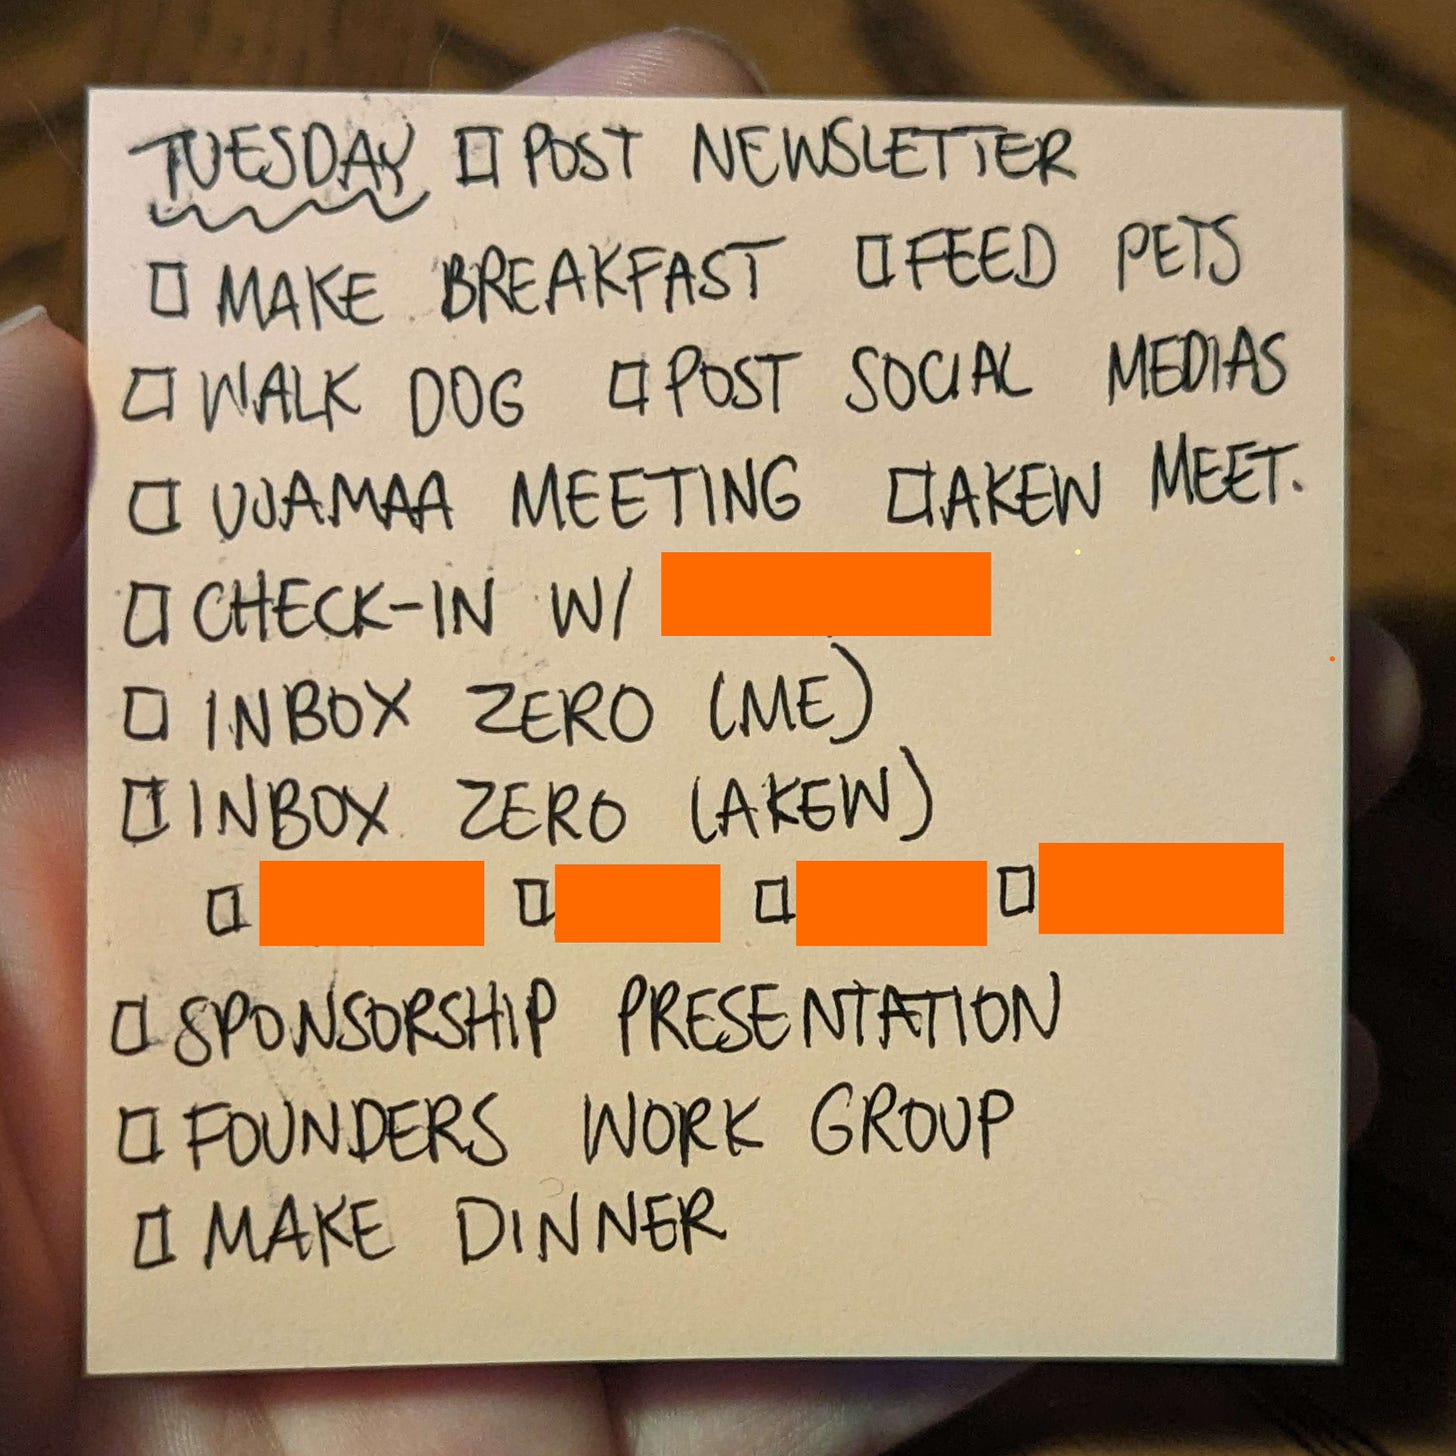 A sticky note with "Tuesday" written on top and a task list featuring items like "Make Breakfast" and "Inbox Zero" on it. There are orange boxes censoring names.